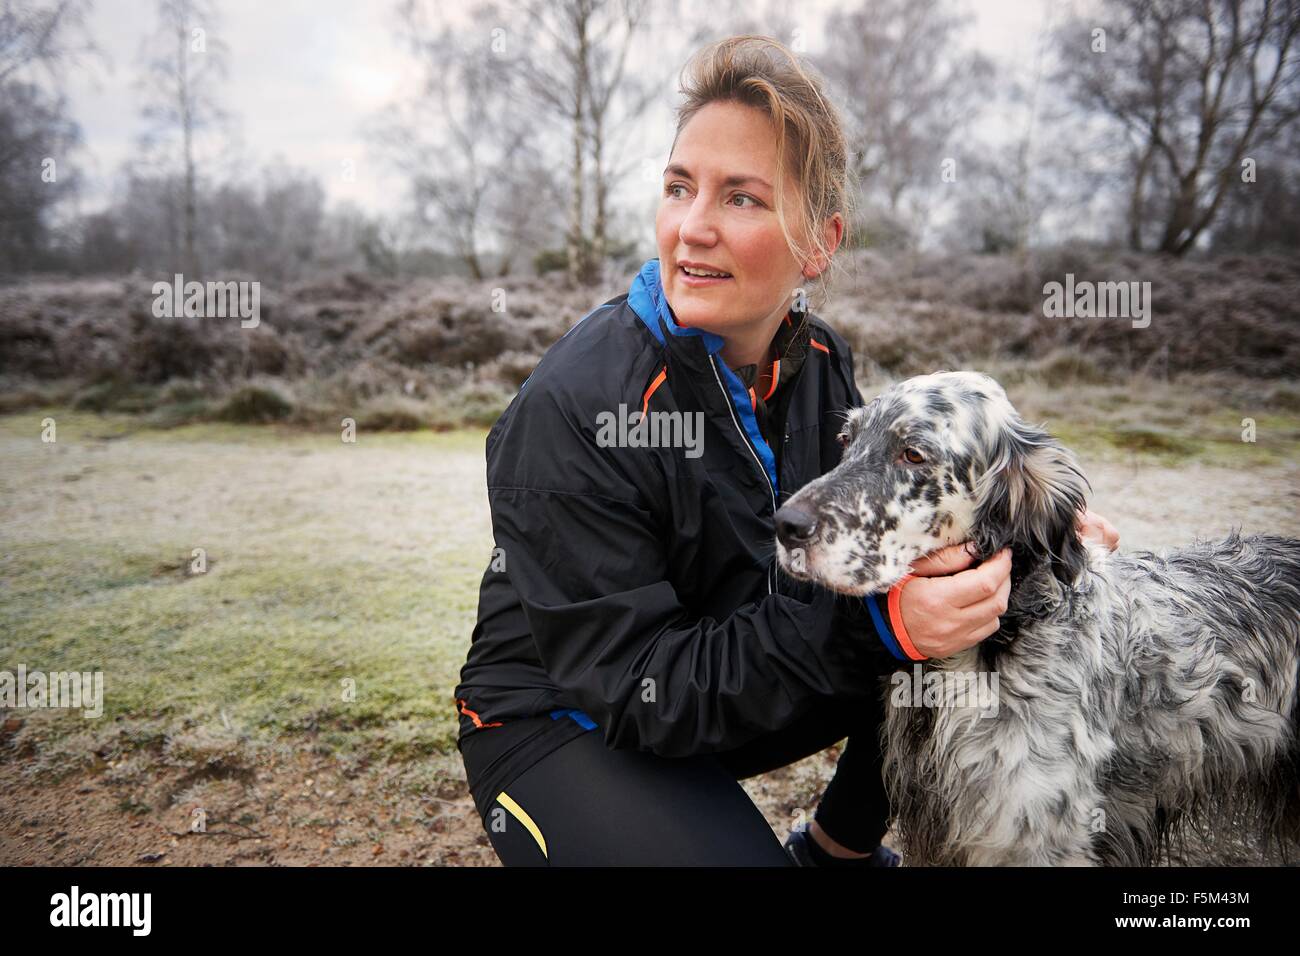 Mature woman crouching down stroking dog looking away Stock Photo